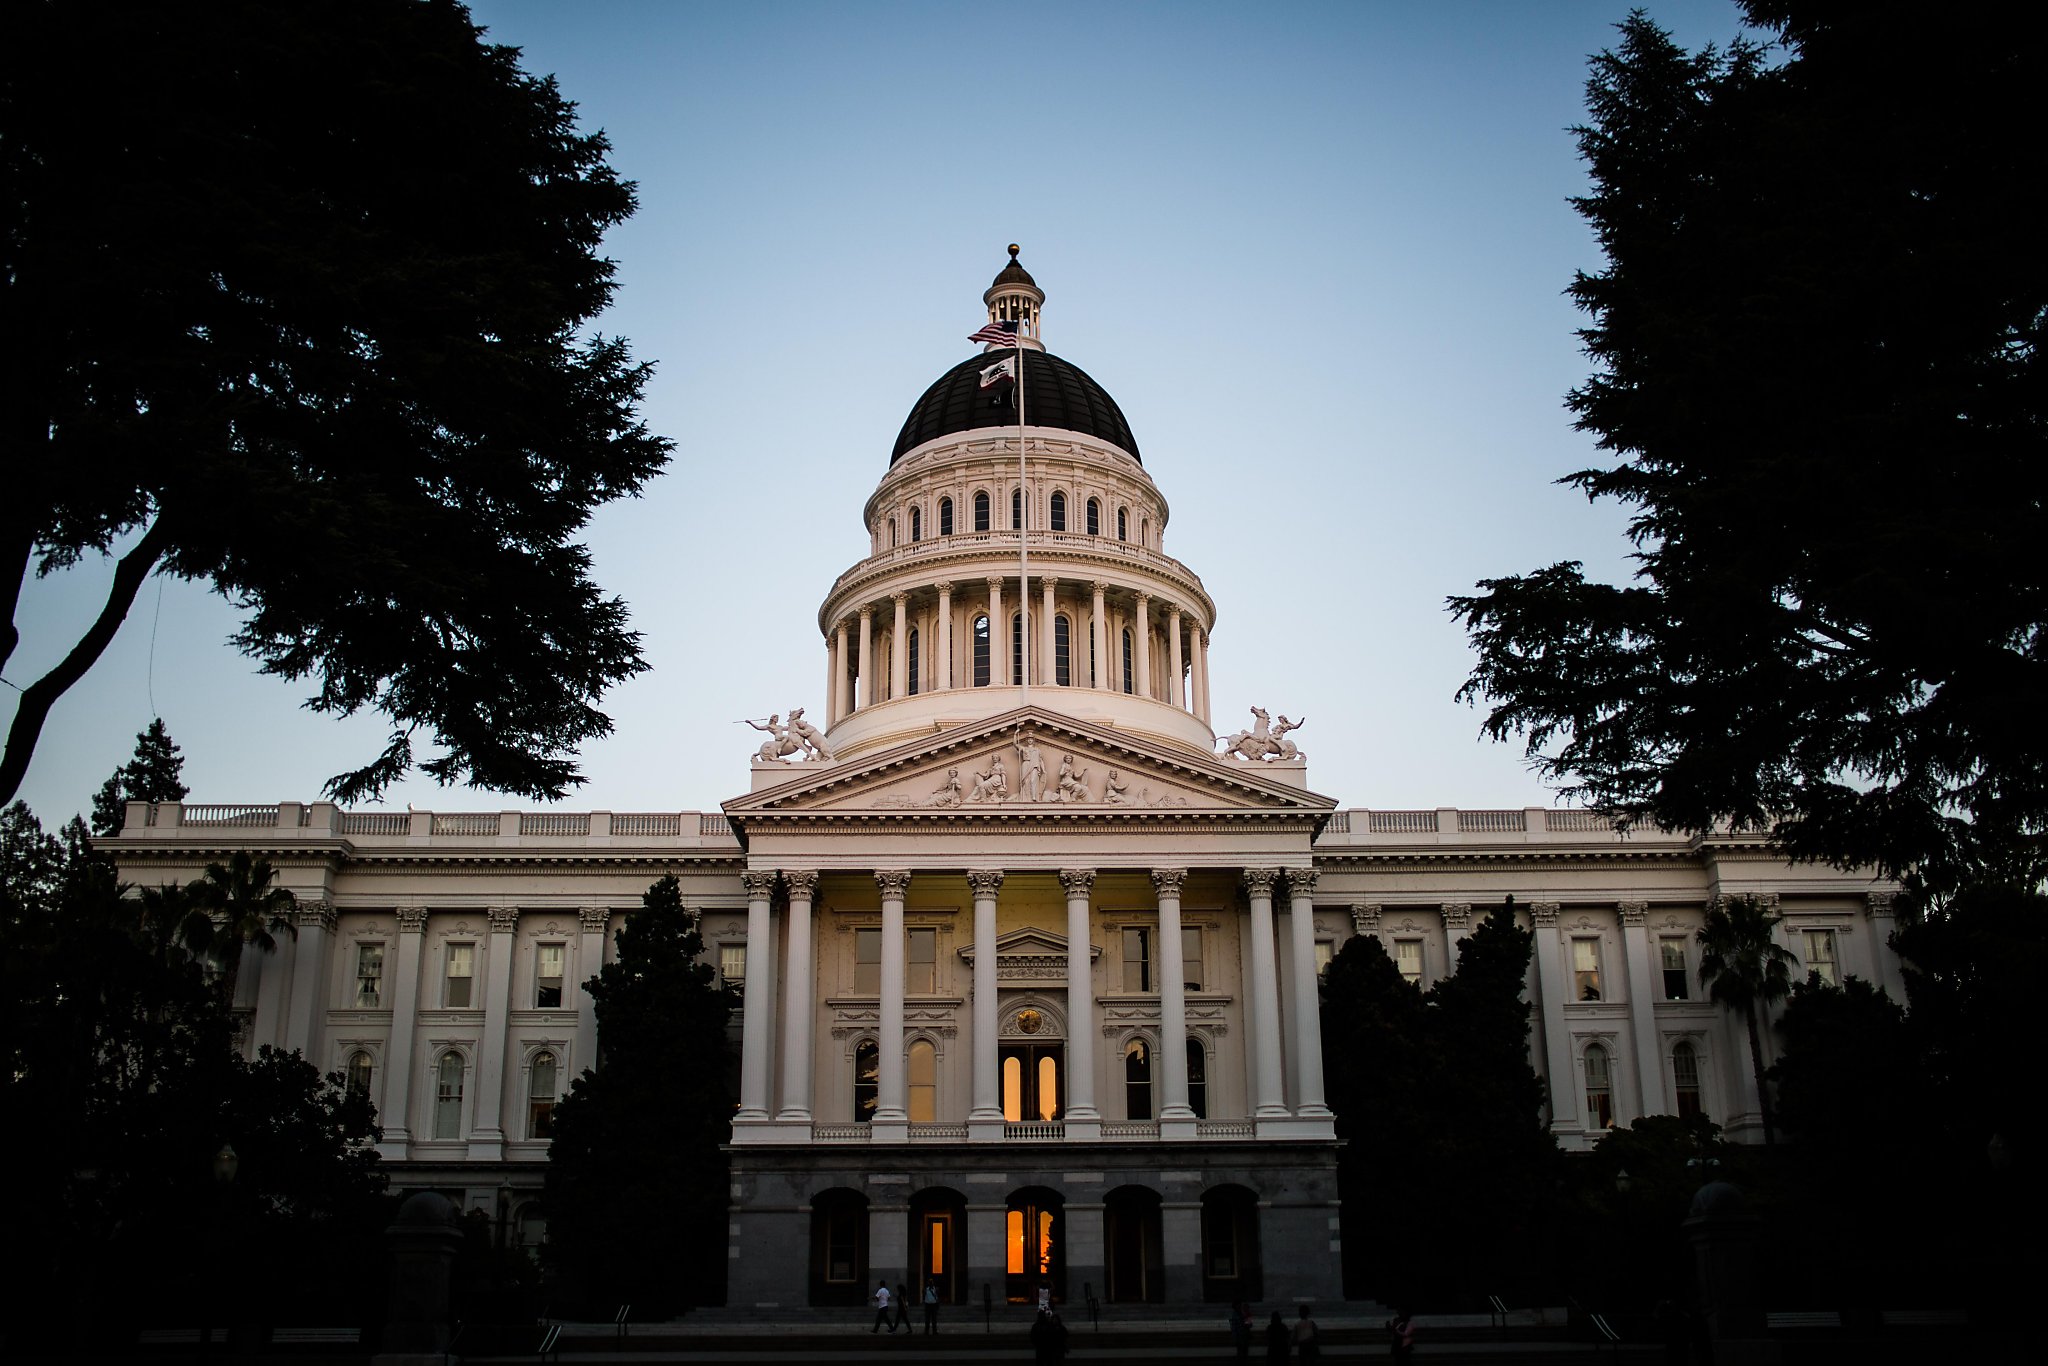 California secession group to hold meetup at State Capitol